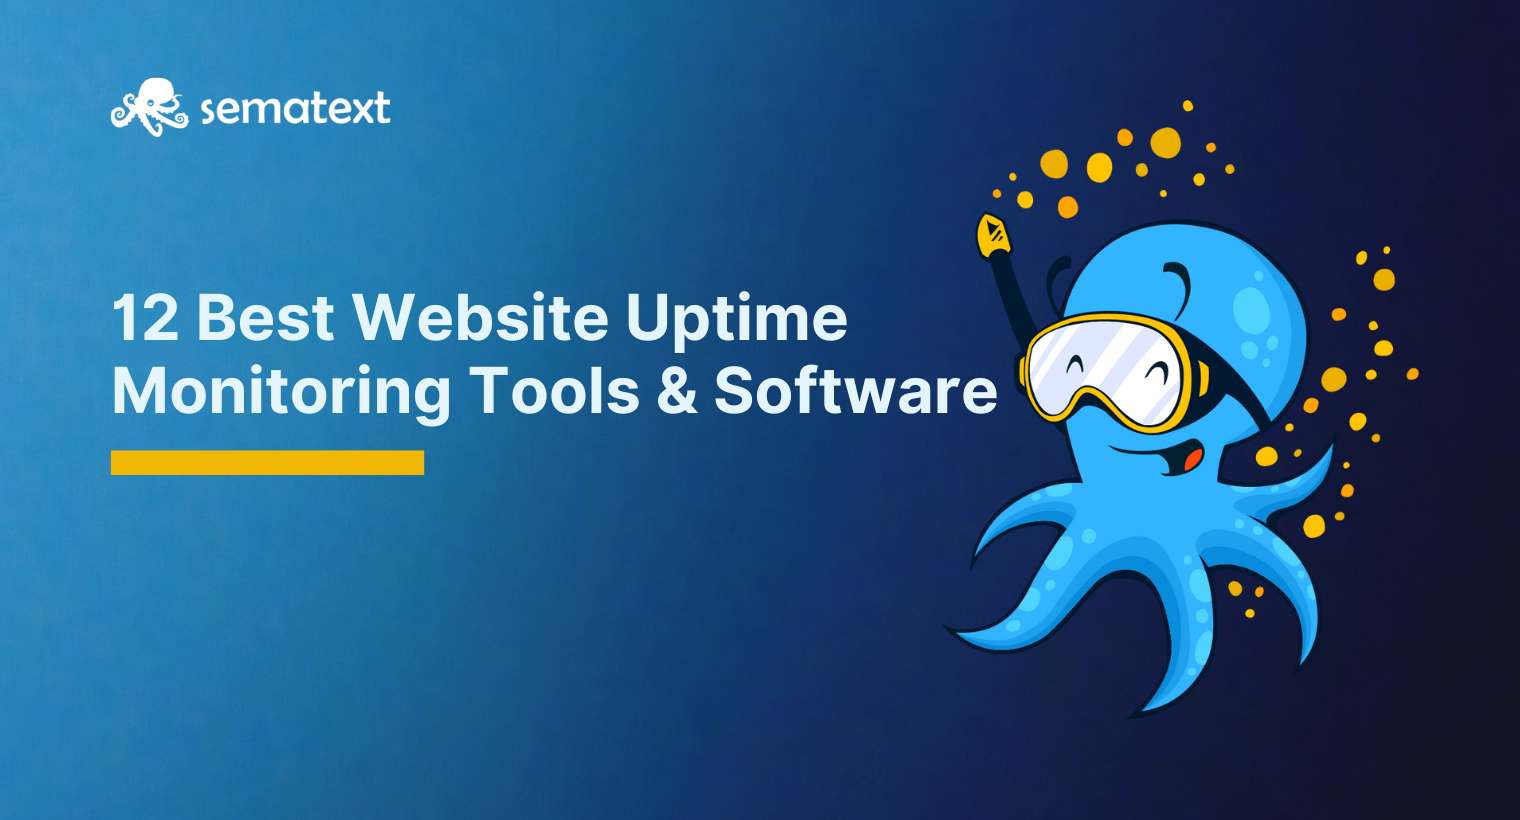 12 Best Website Uptime Monitoring Tools & Software [2022 Reviews]